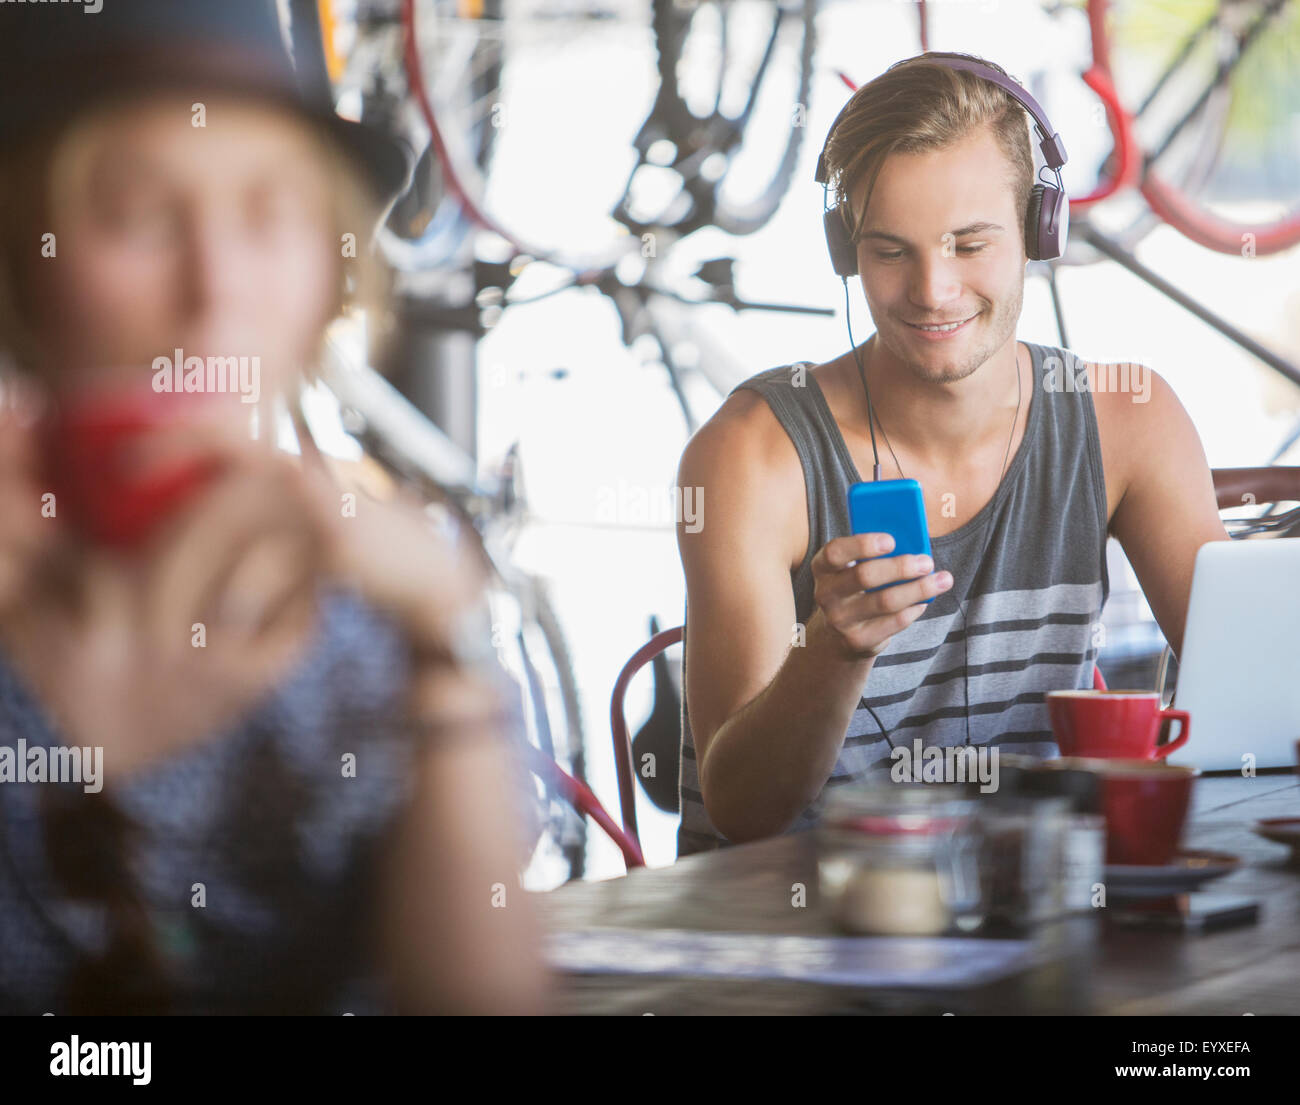 Young man with headphones and laptop texting with cell phone in cafe Stock Photo